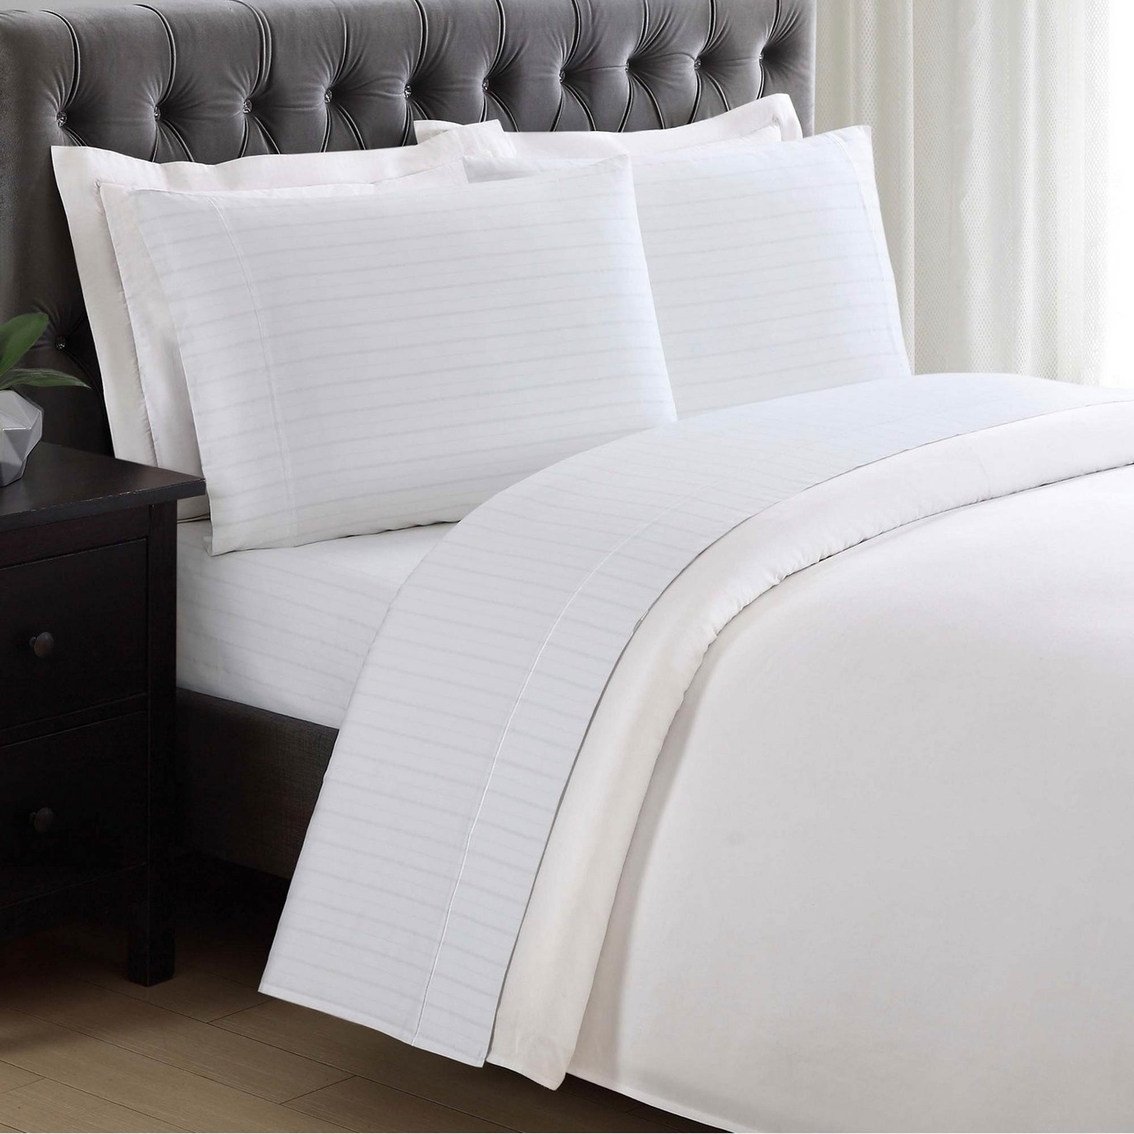 Charisma Home 310 Thread Count Classic Stripe Cotton Sateen Sheet Set - Image 3 of 3